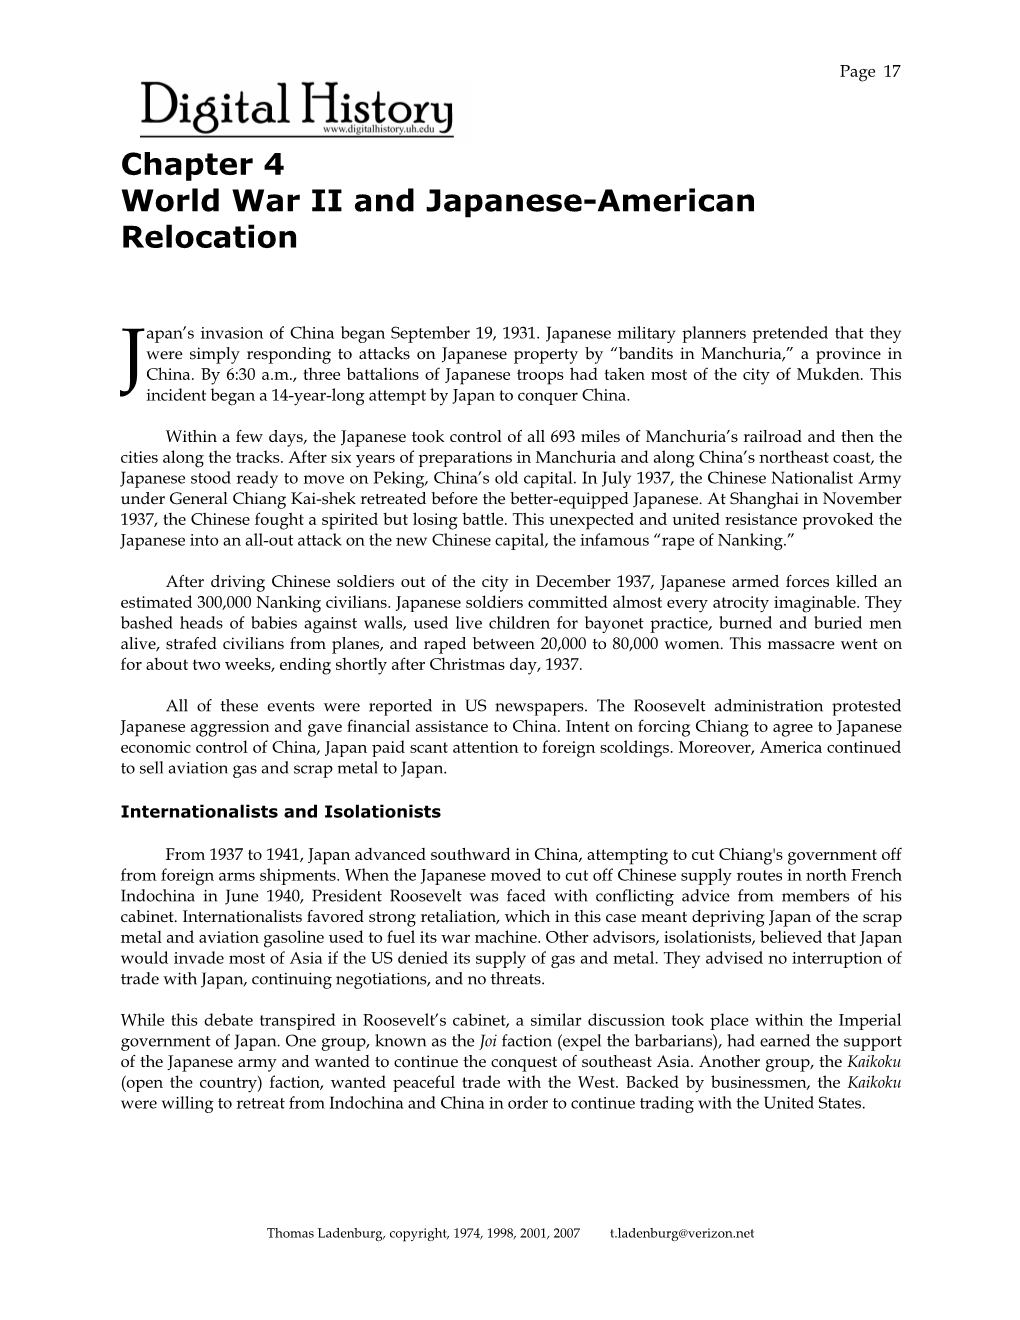 Chapter 4 World War II and Japanese-American Relocation